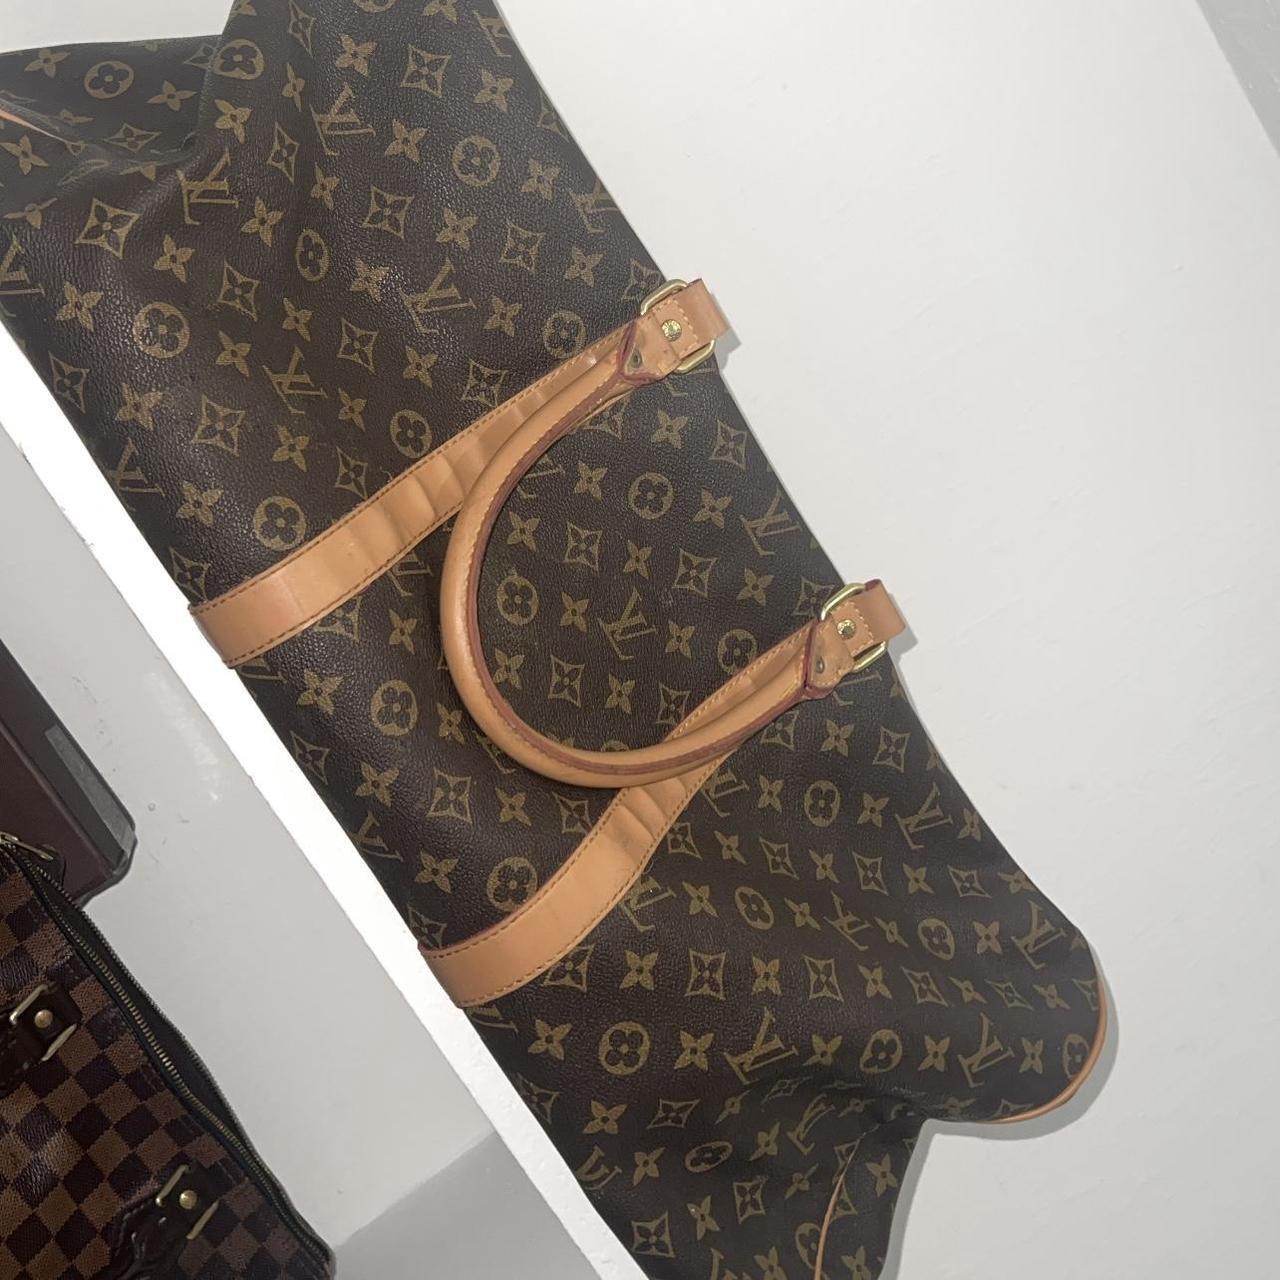 Louis Vuitton Moscow City Guide French - Depop